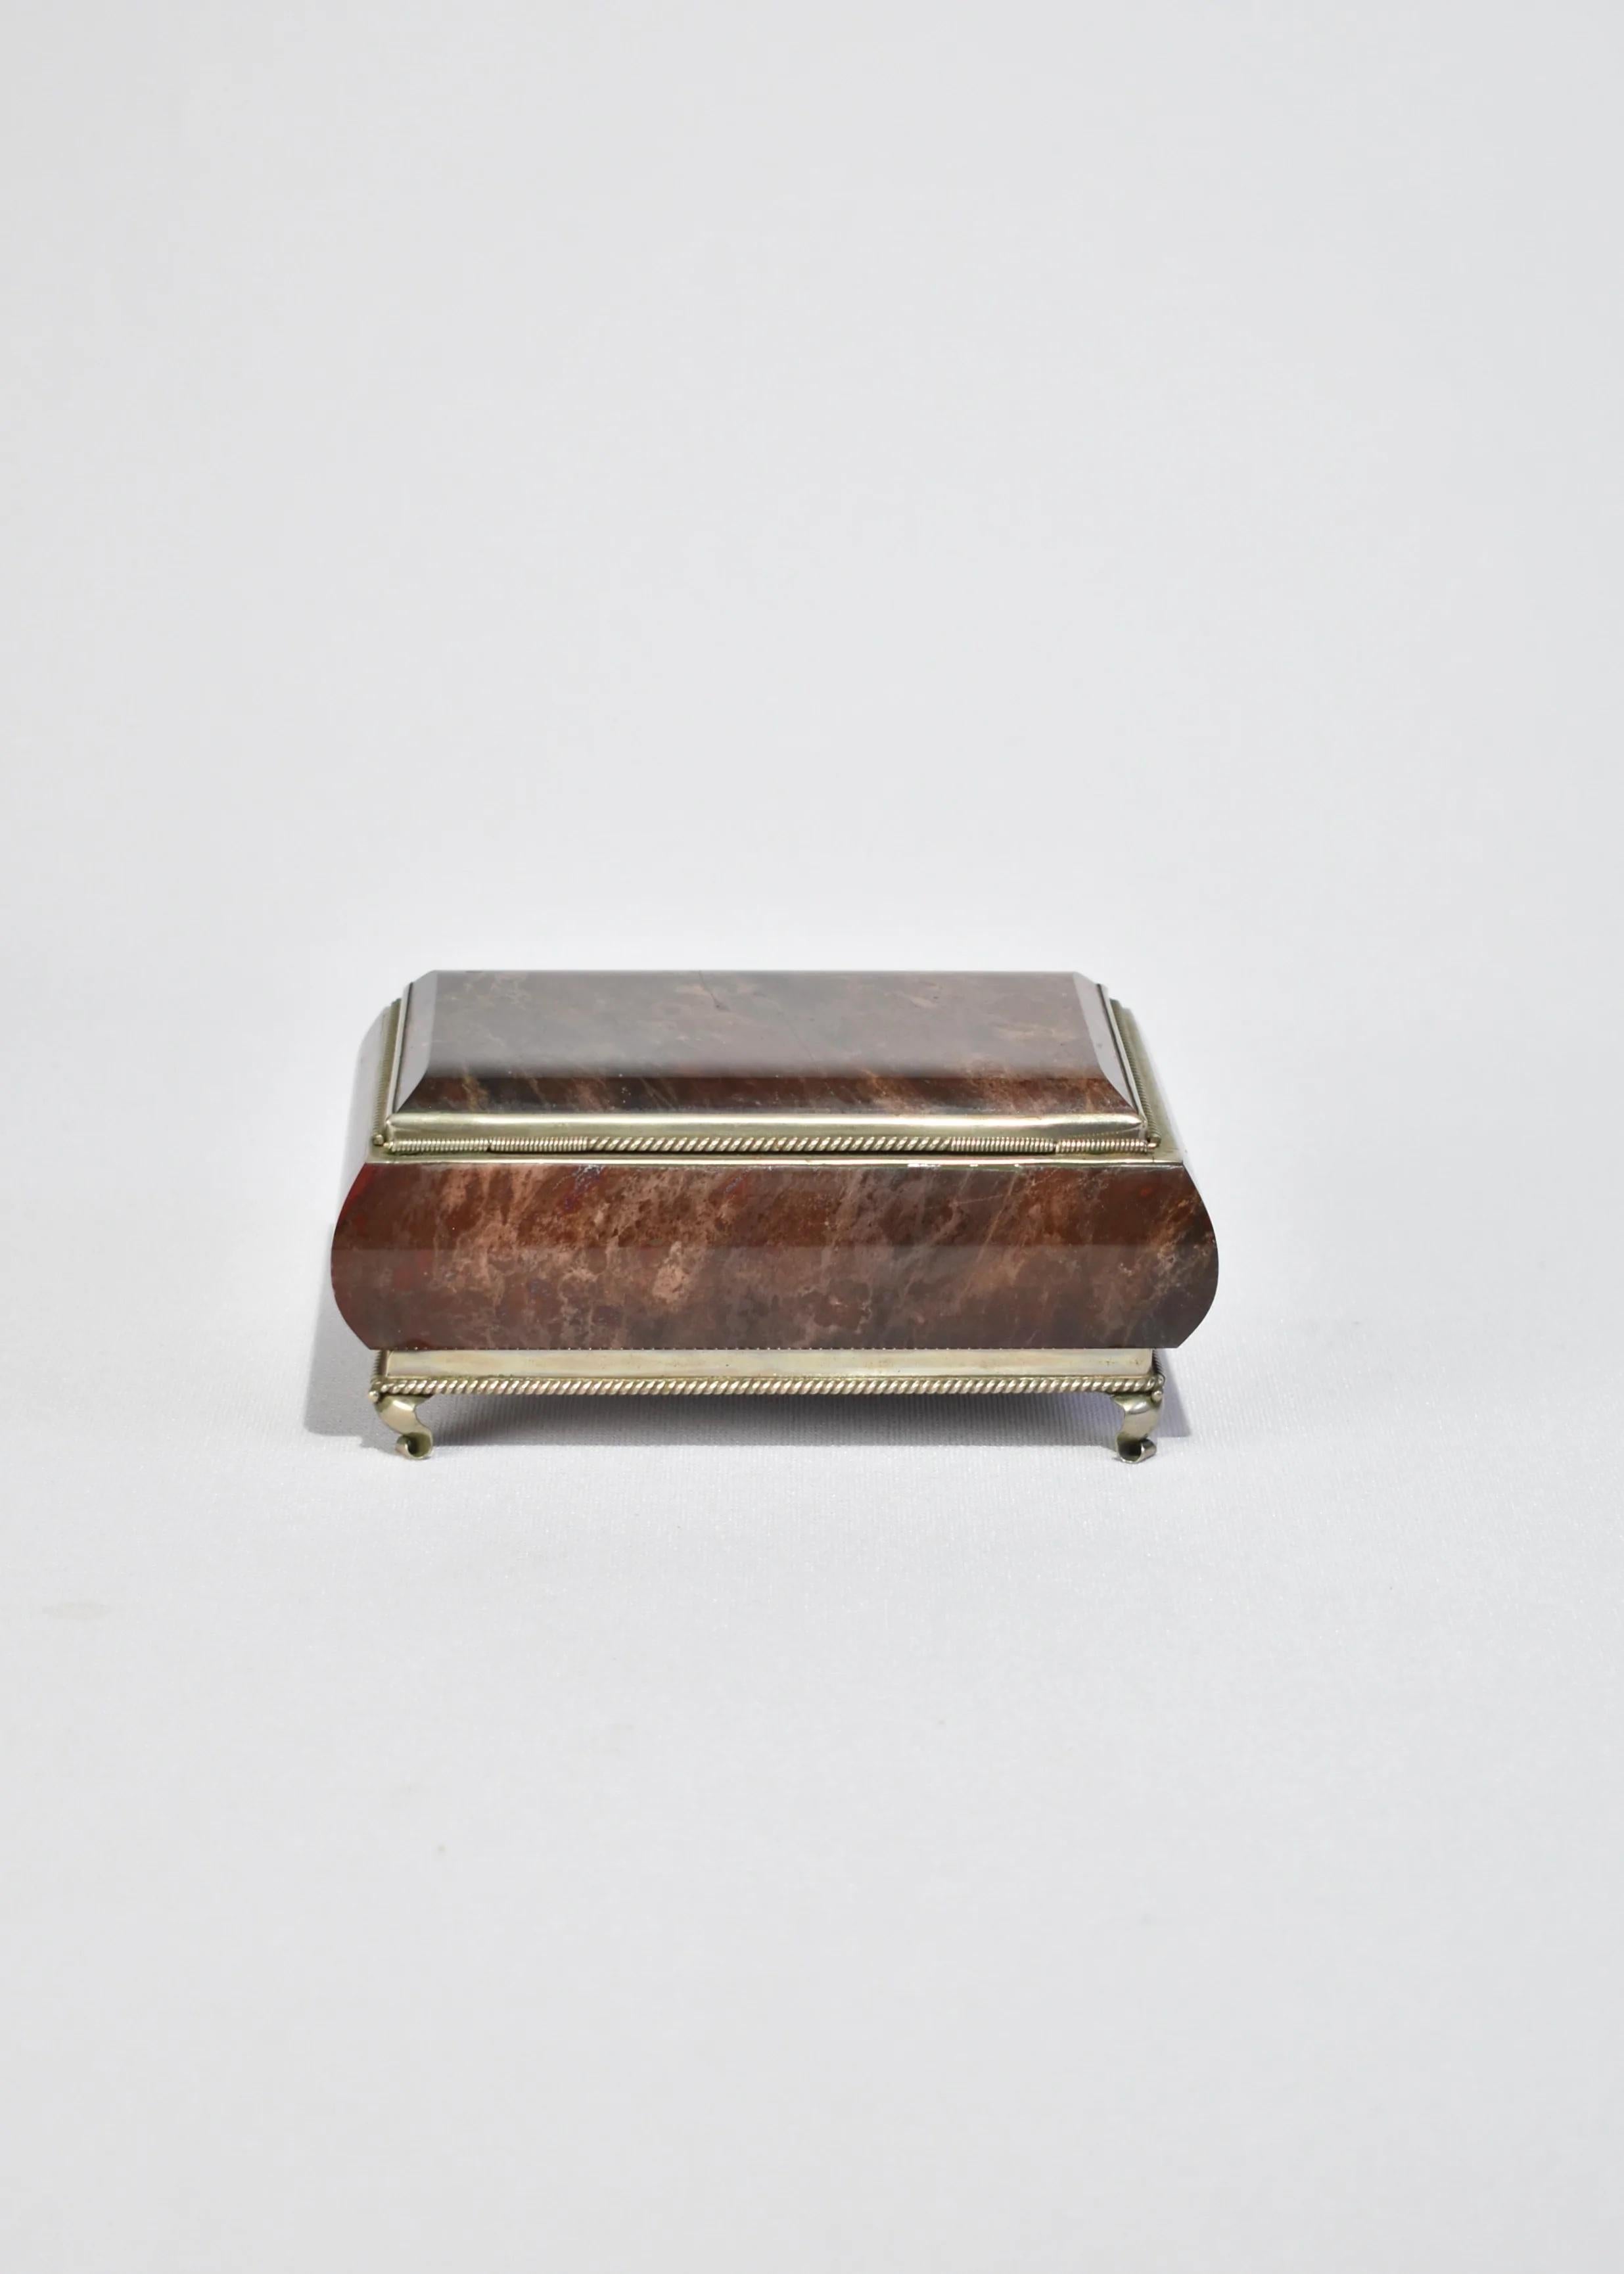 Stunning, deep red marble box with hinged lid and silver rope detailing.